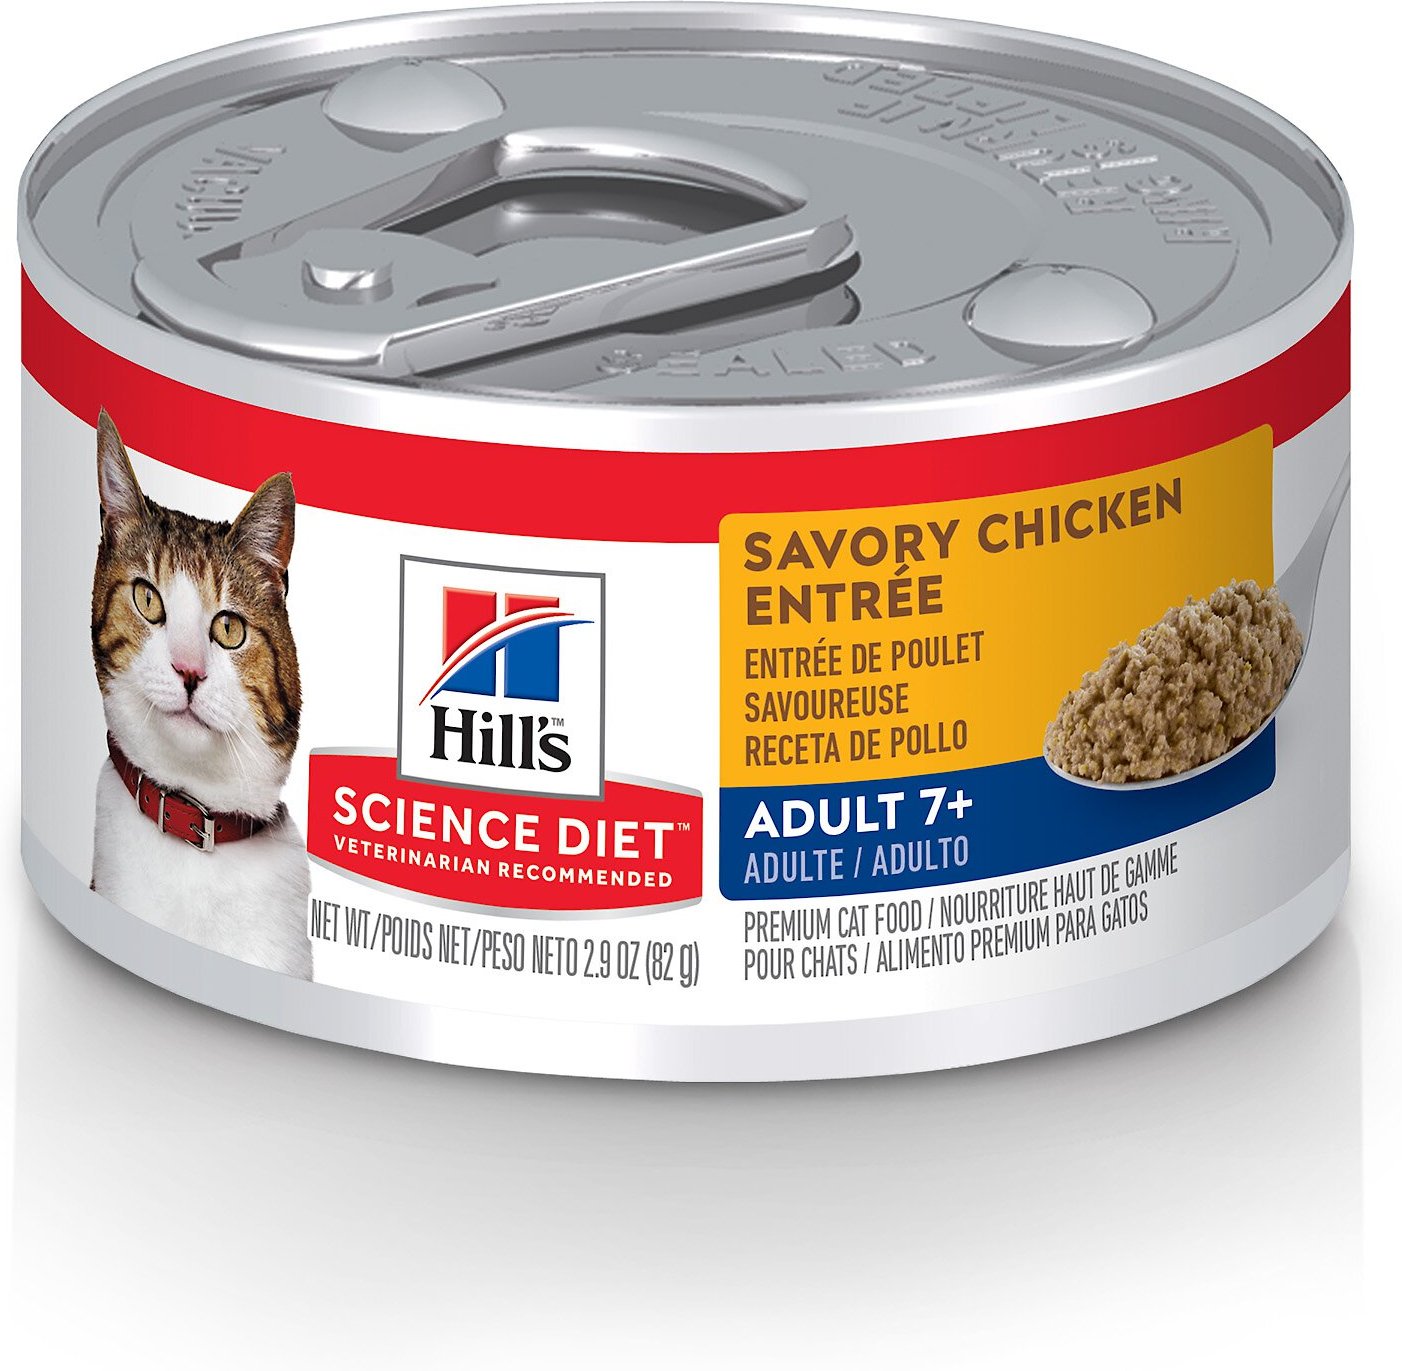 HILL'S SCIENCE DIET Adult 7+ Savory Chicken Entree Canned Cat Food, 2.9